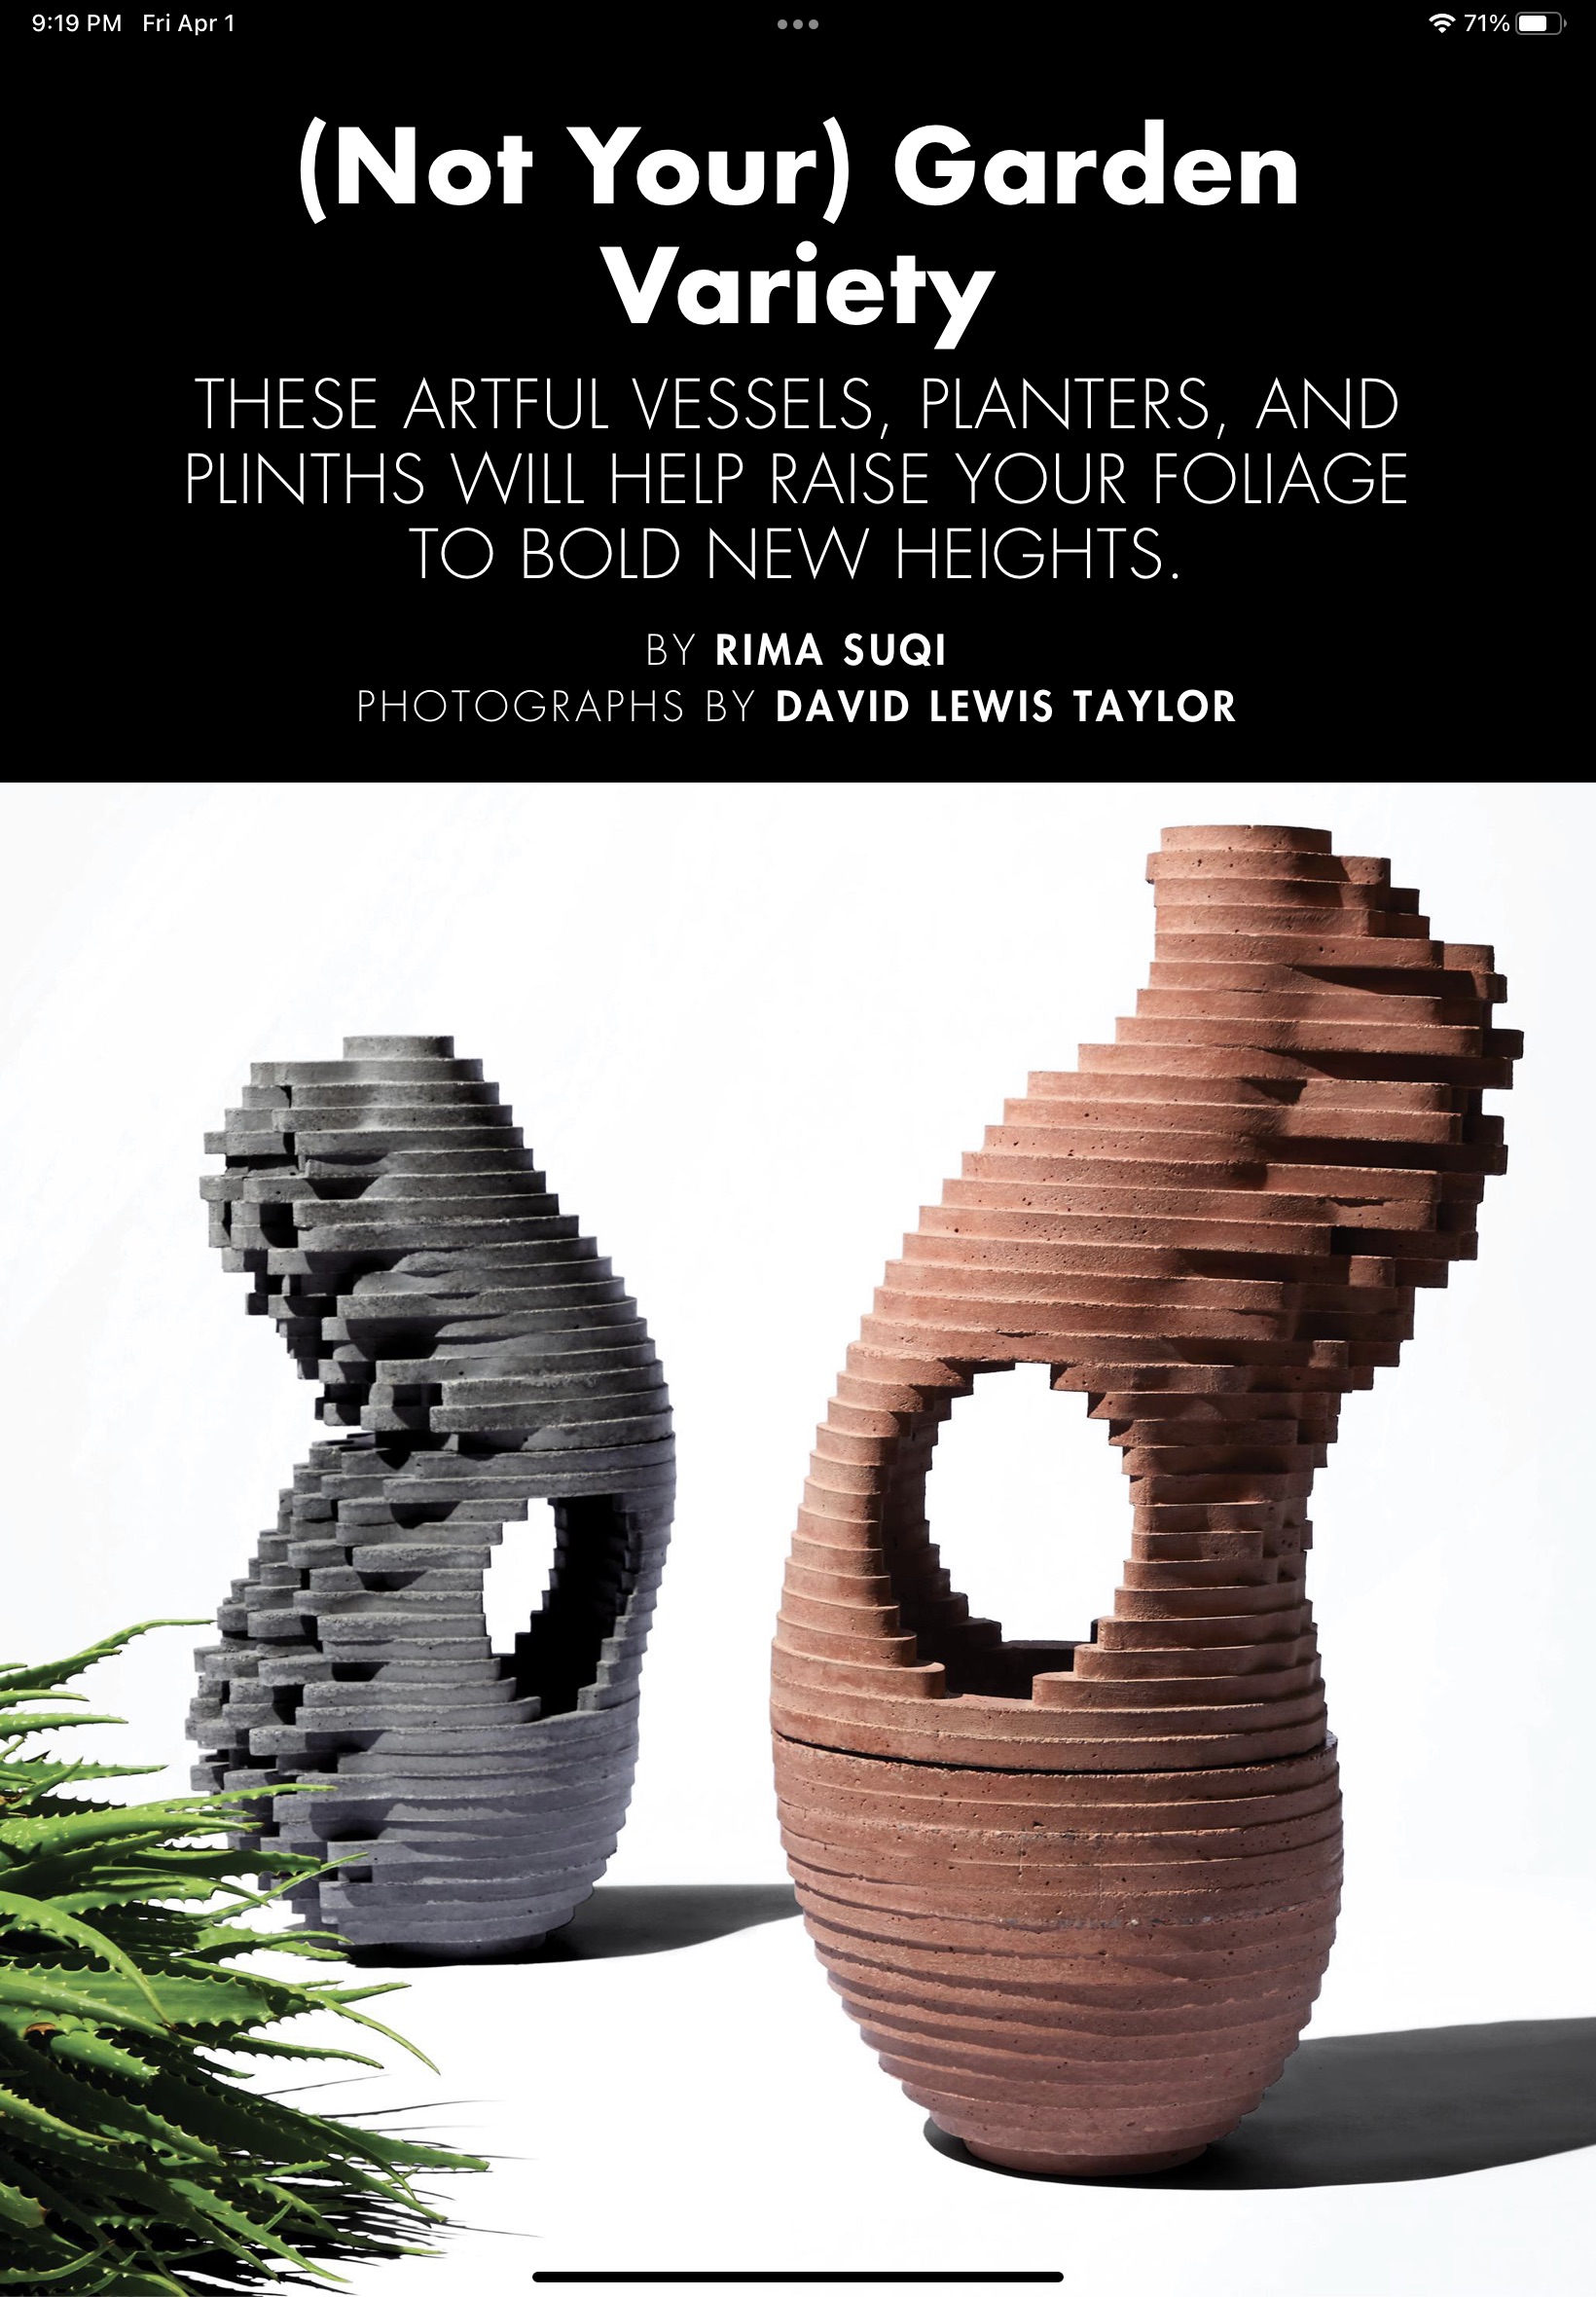 Gary Fernandez Wandering Figures planters, available through Culture Object in New York City